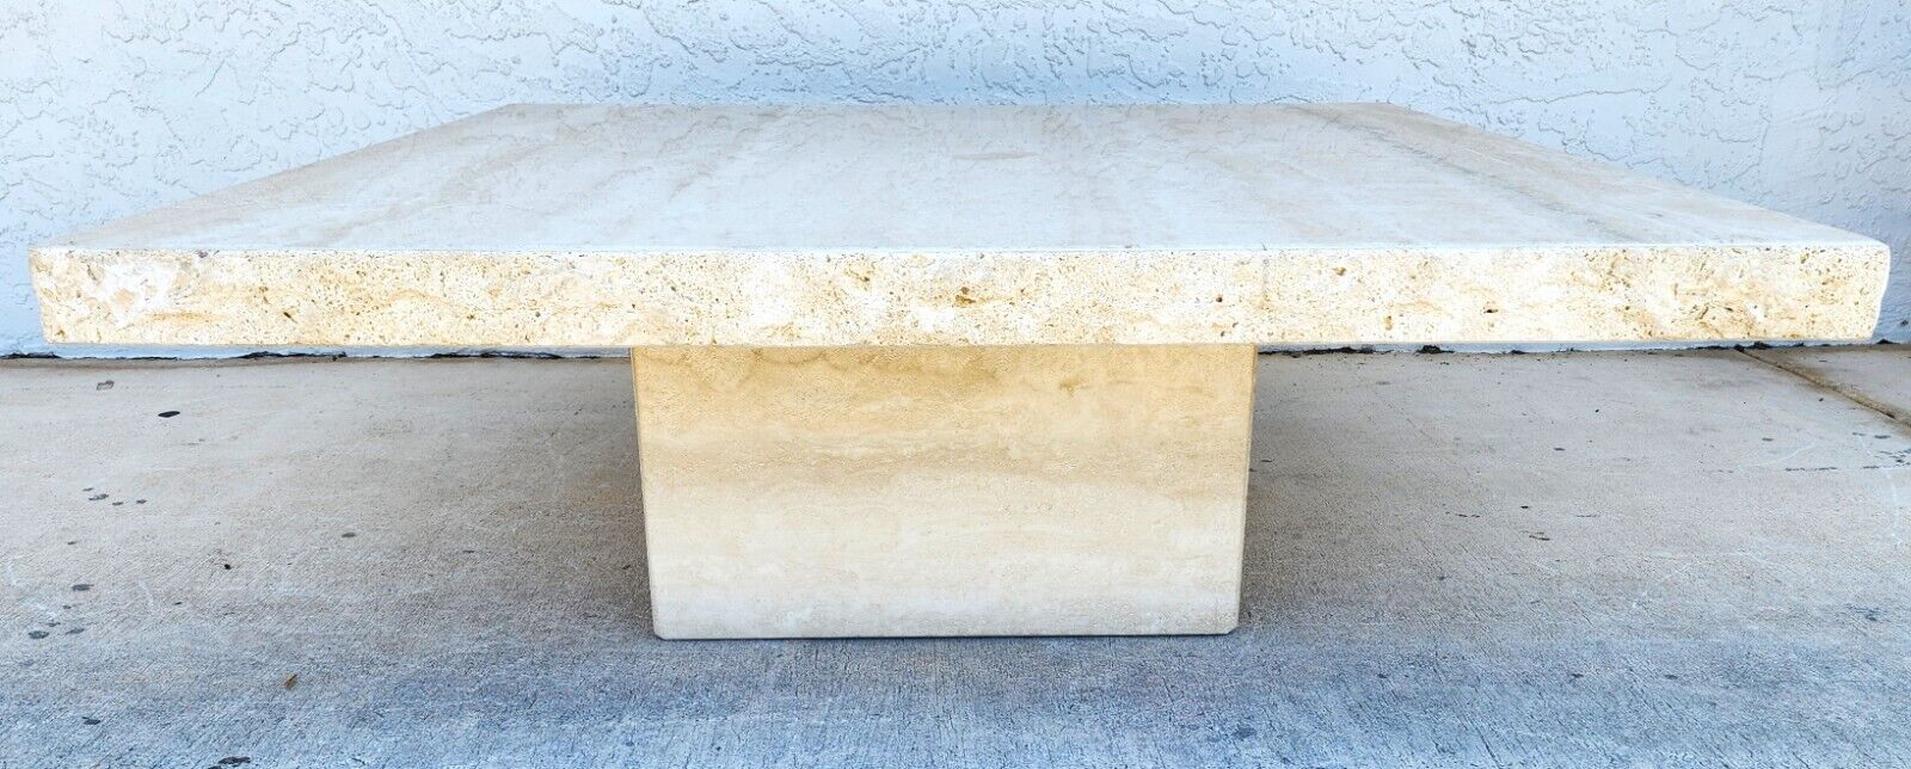 For FULL item description click on CONTINUE READING at the bottom of this page.

Offering One Of Our Recent Palm Beach Estate Fine Furniture Acquisitions Of A 
1970s Italian Live Edge Travertine Polished Coffee Cocktail Table by STONE